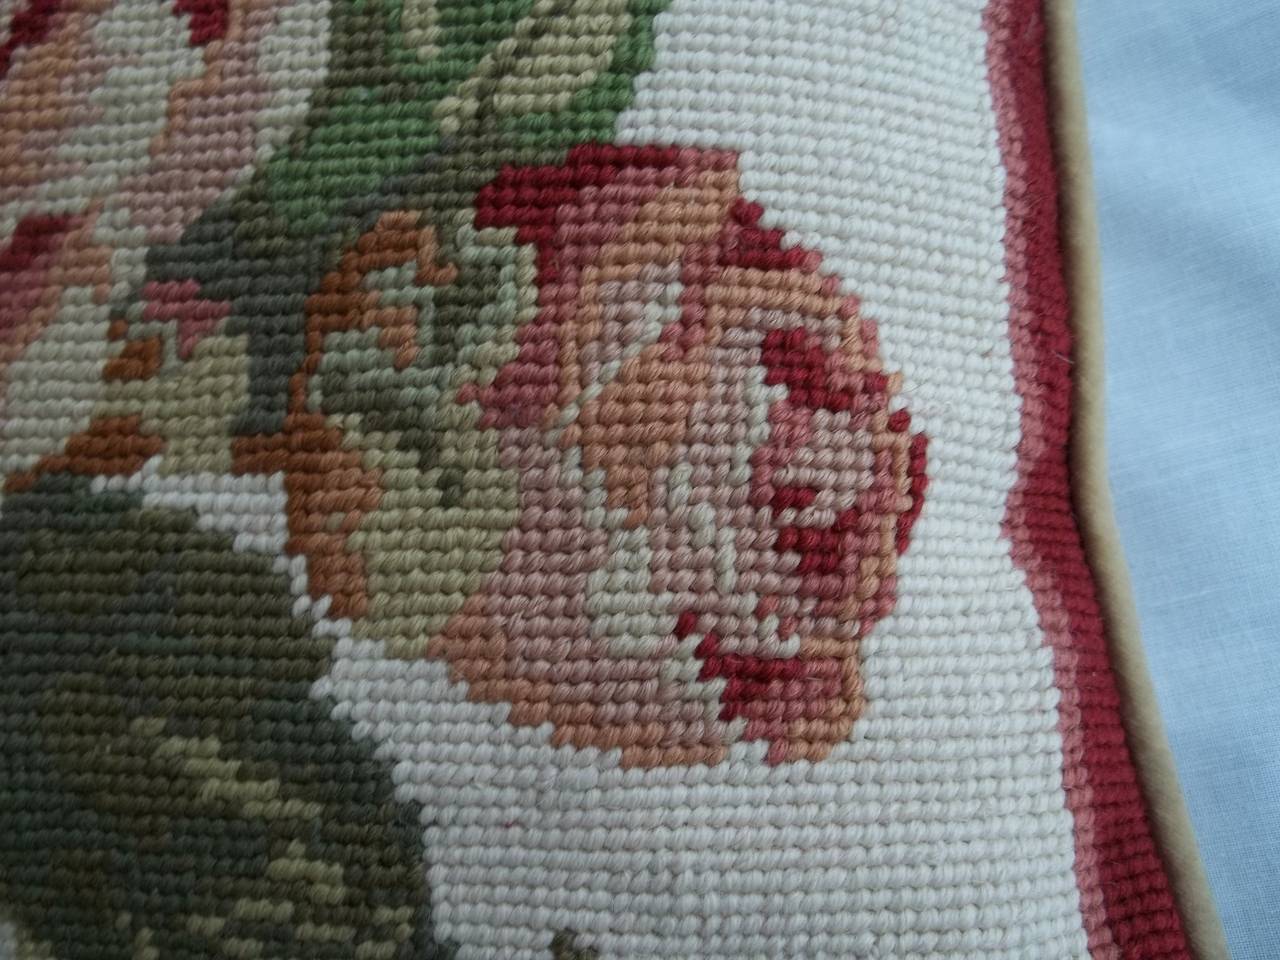 Hand-Crafted Needlepoint, Pillow or Cushion, Roses , English, Mid 20th Century.